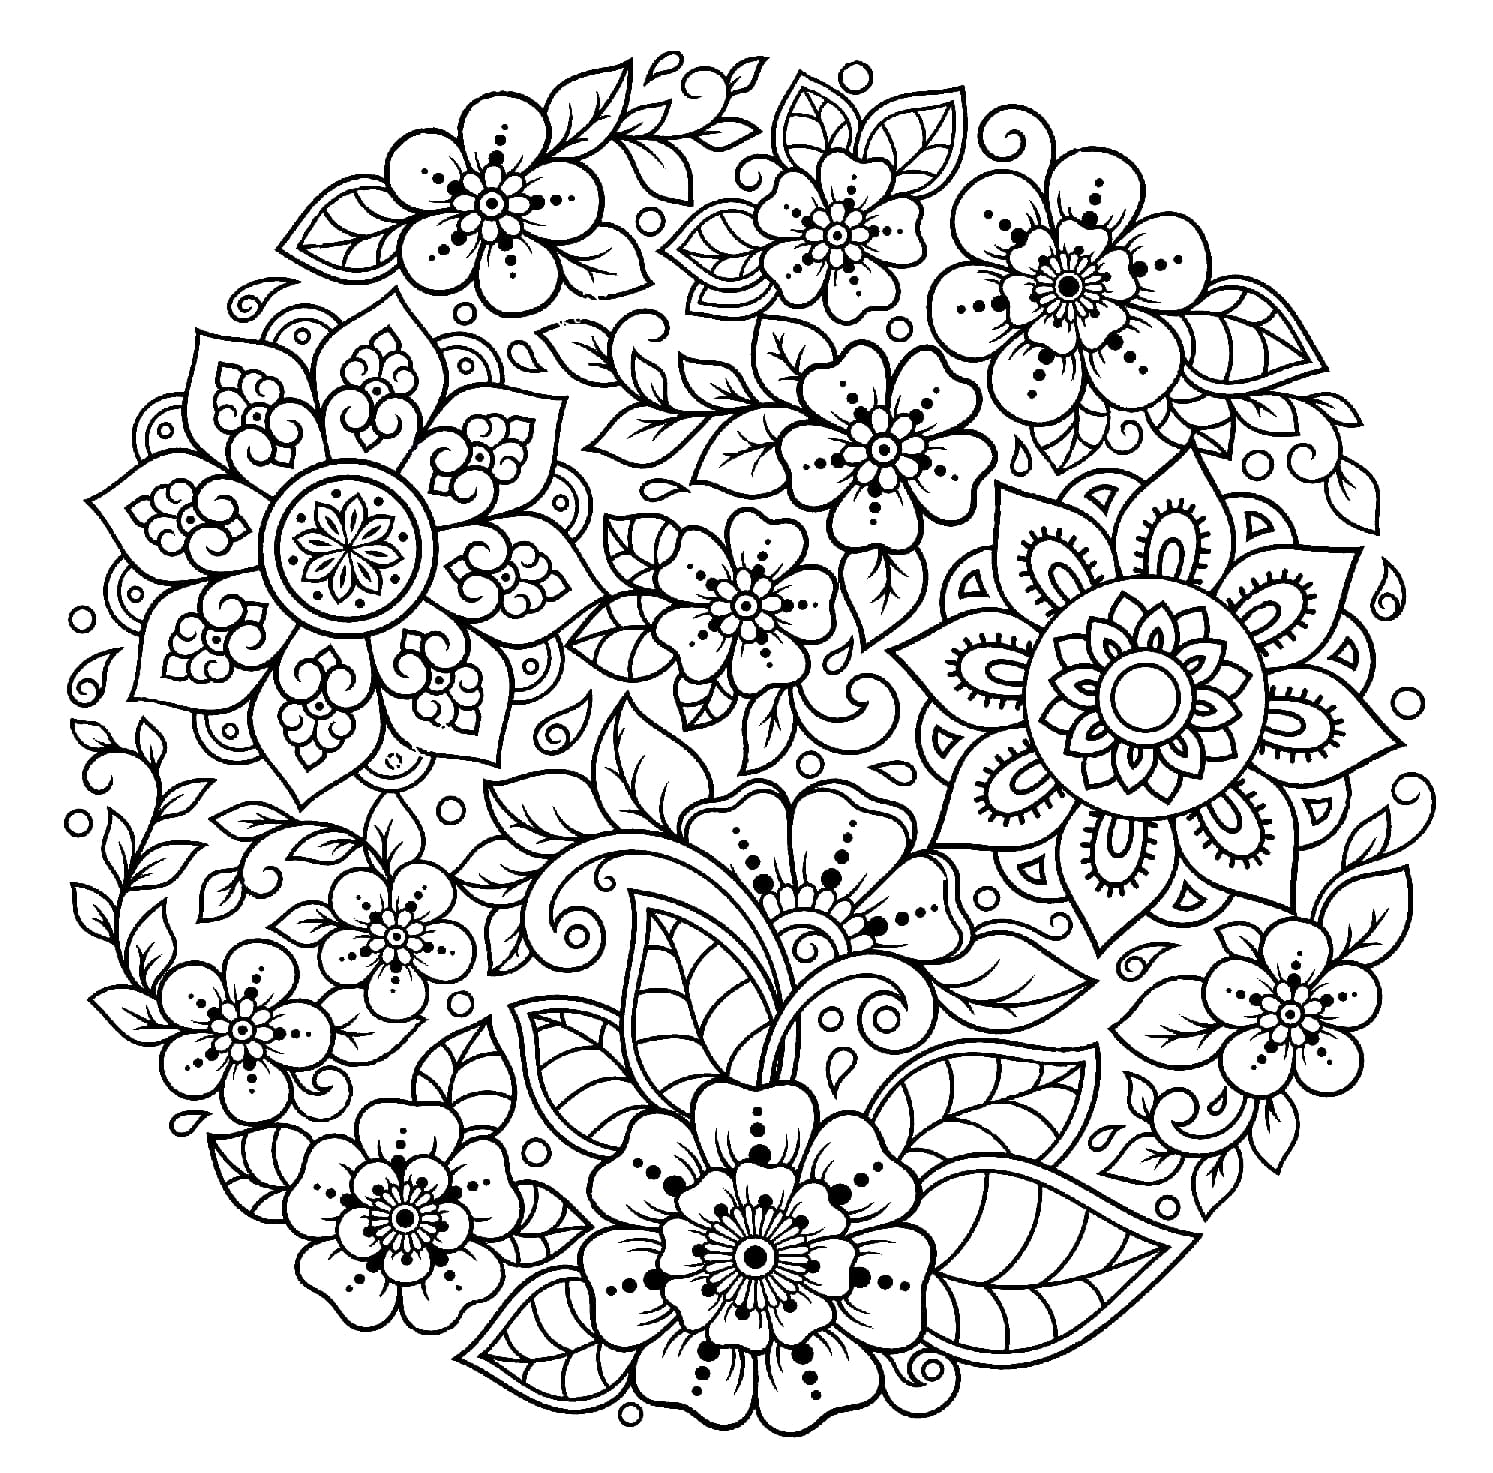 Flowers Mandala Coloring Pages Coloring Pages for Adults